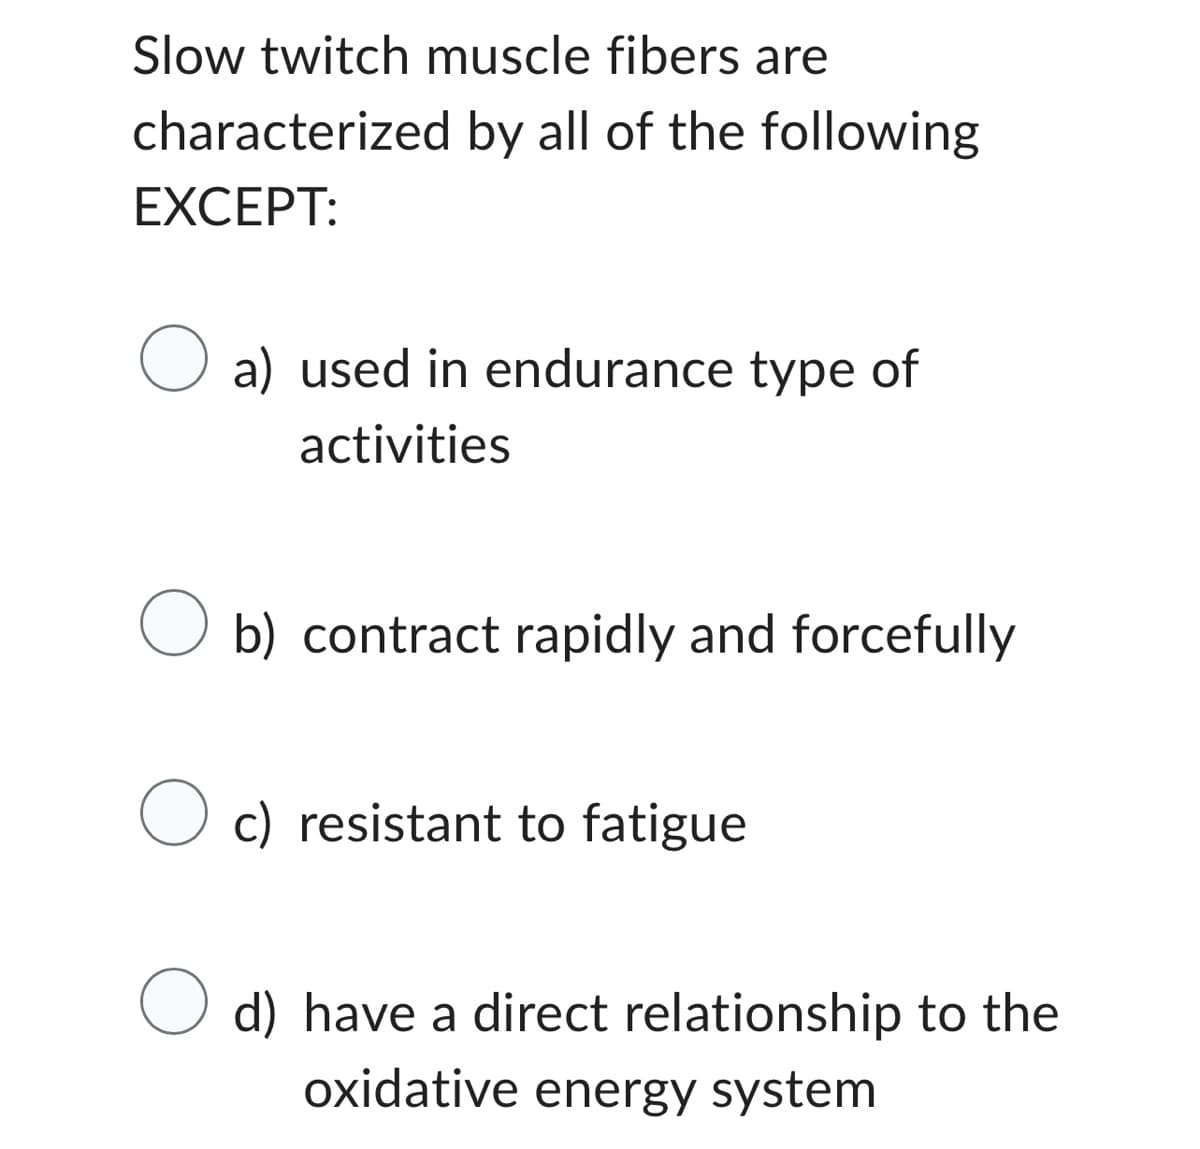 Slow twitch muscle fibers are
characterized by all of the following
EXCEPT:
O a) used in endurance type of
activities
O b) contract rapidly and forcefully
Oc) resistant to fatigue
O d) have a direct relationship to the
oxidative energy system